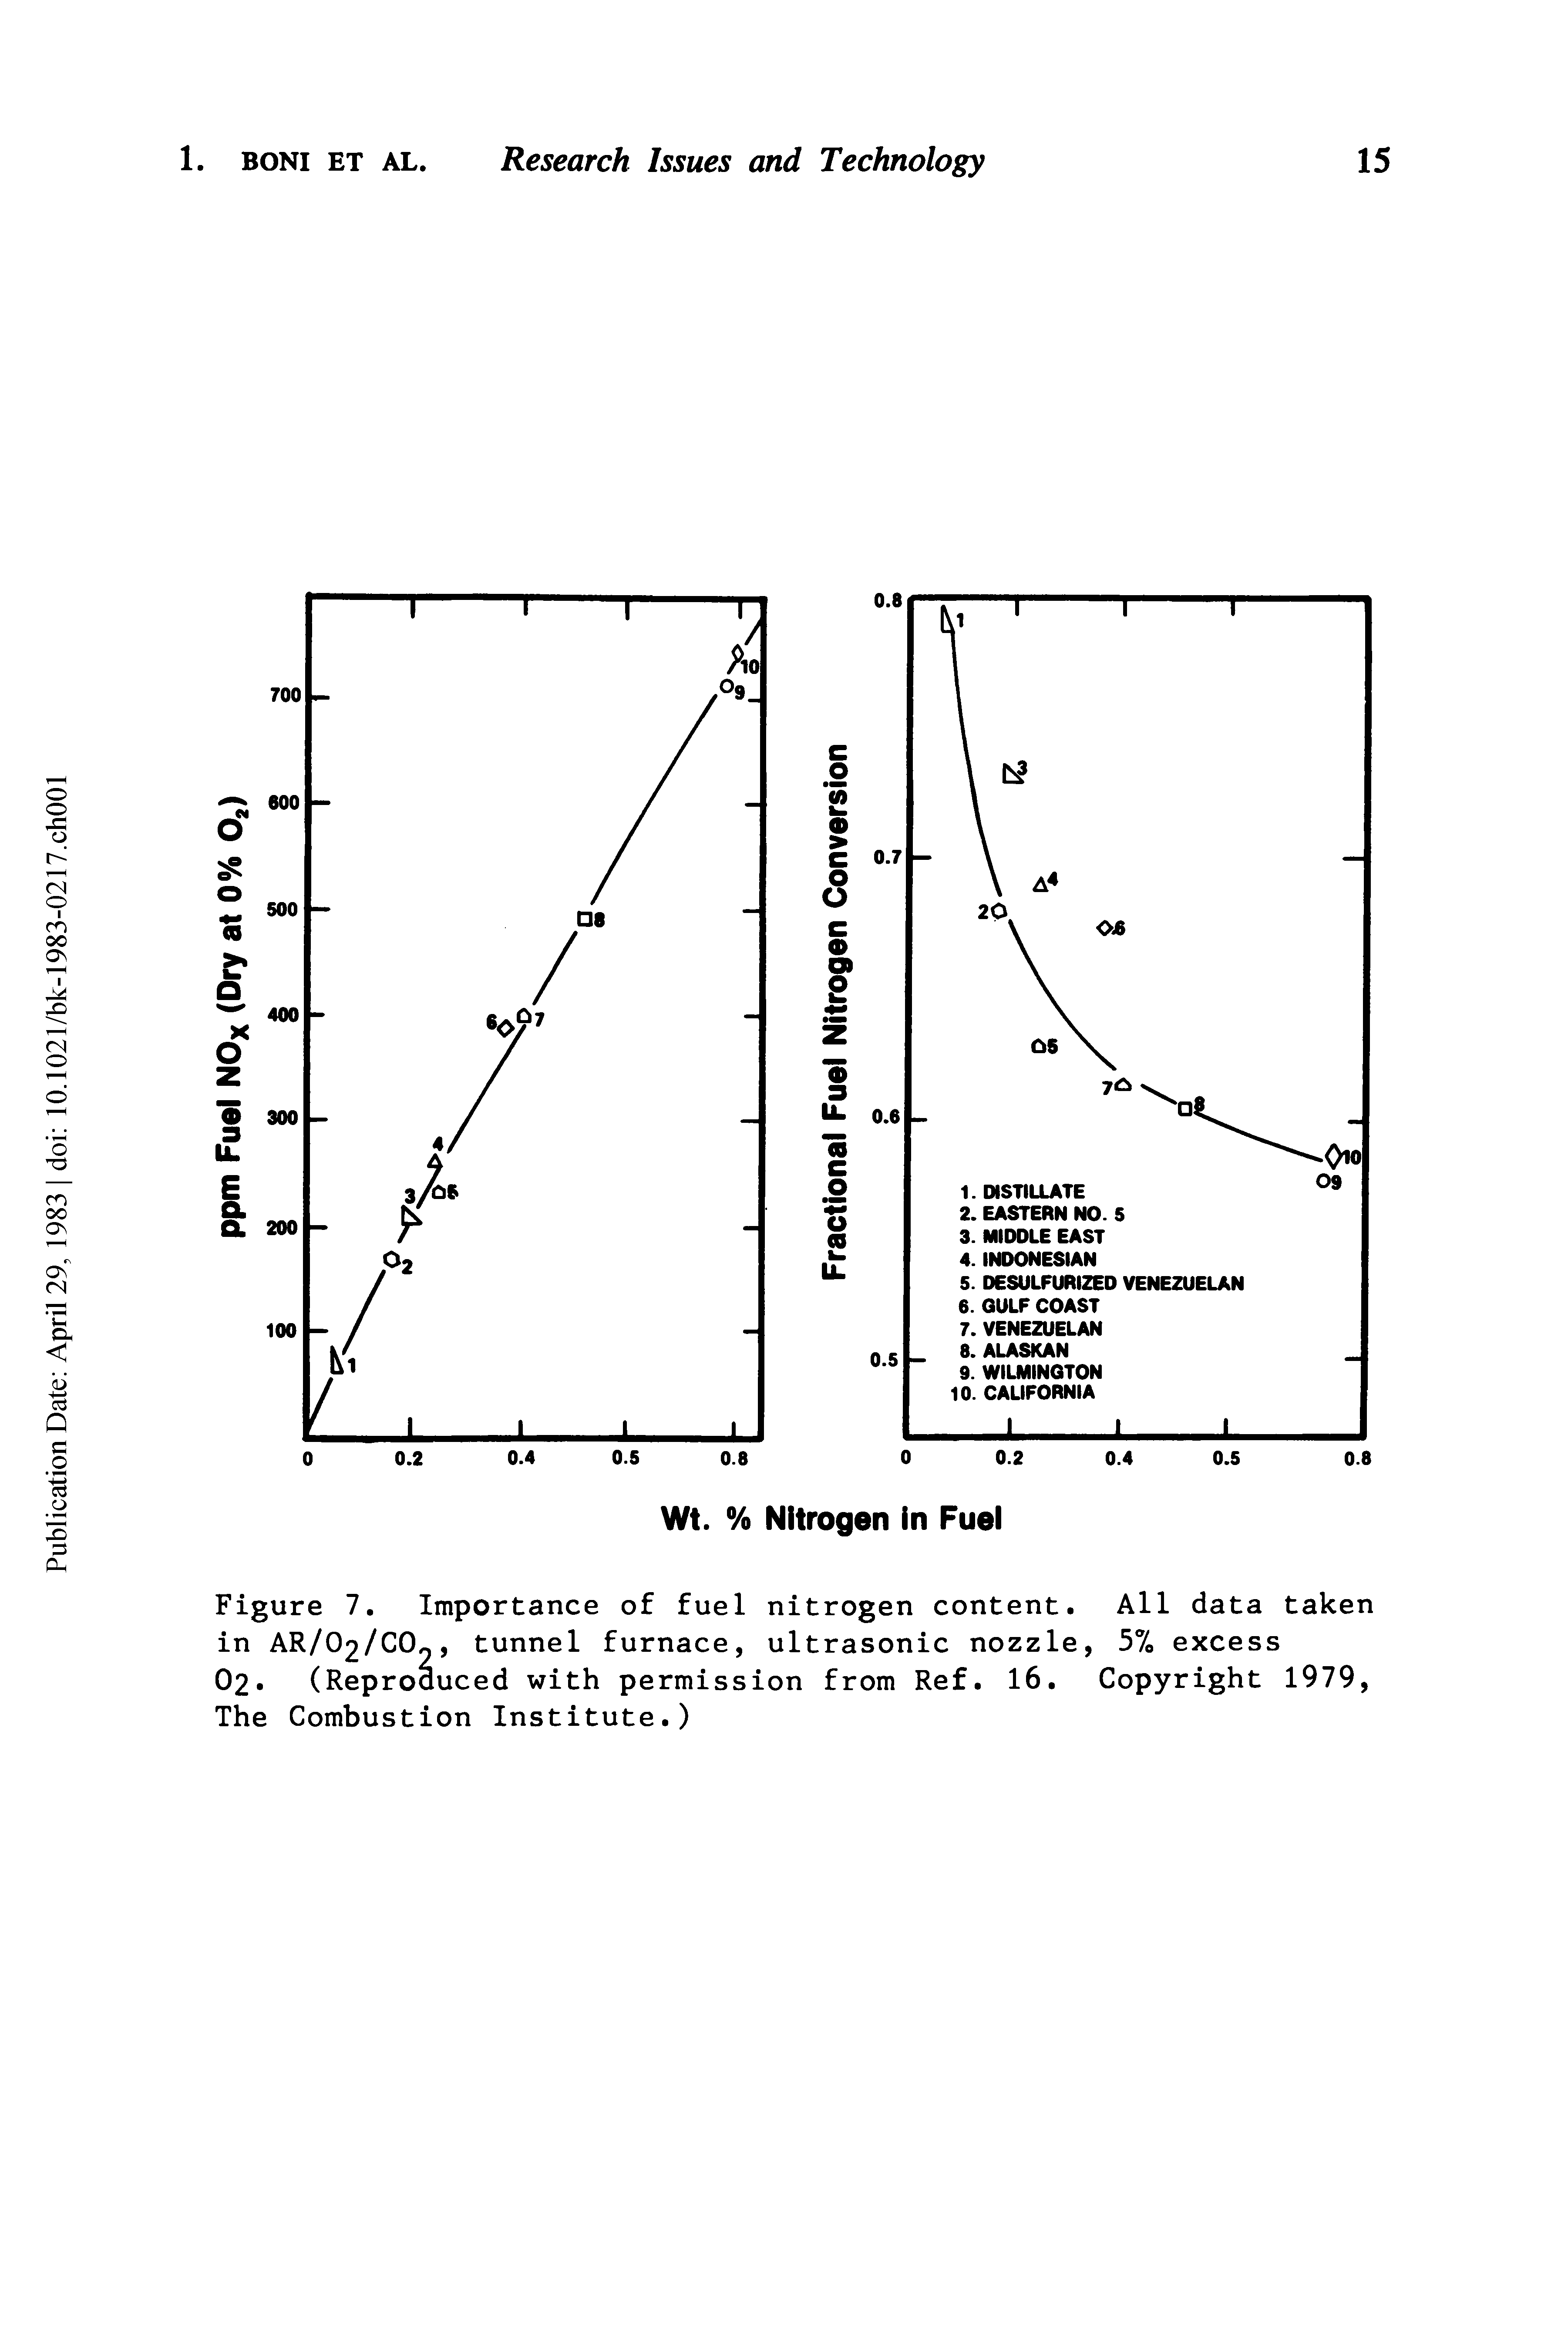 Figure 7. Importance of fuel nitrogen content. All data taken in AR/O2/CCL, tunnel furnace, ultrasonic nozzle, 5% excess 02 (Reproduced with permission from Ref. 16. Copyright 1979, The Combustion Institute.)...